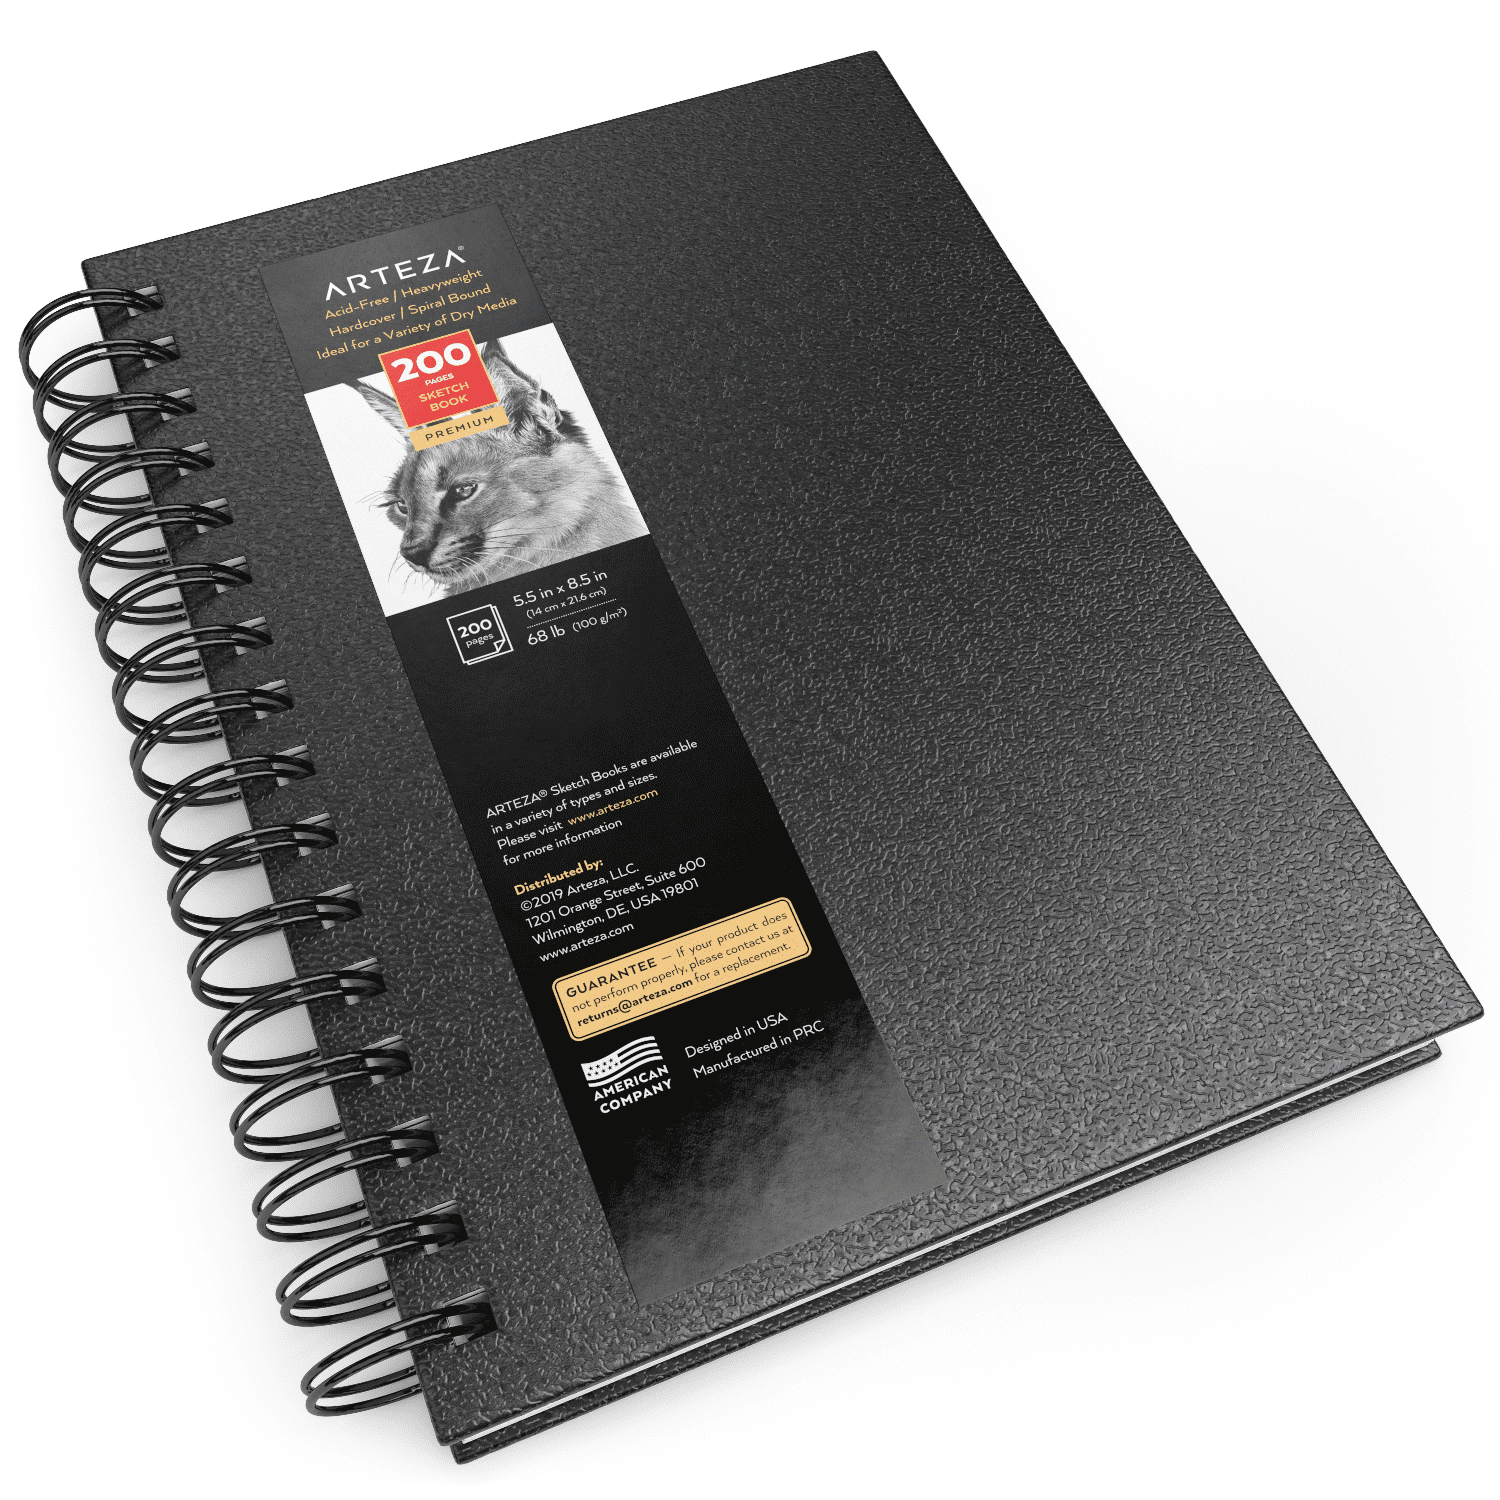 Arteza Mini Sketchbook, 3.5 inch x 5.5 inch, 88 Pages of Paper - 2 Pack, Black